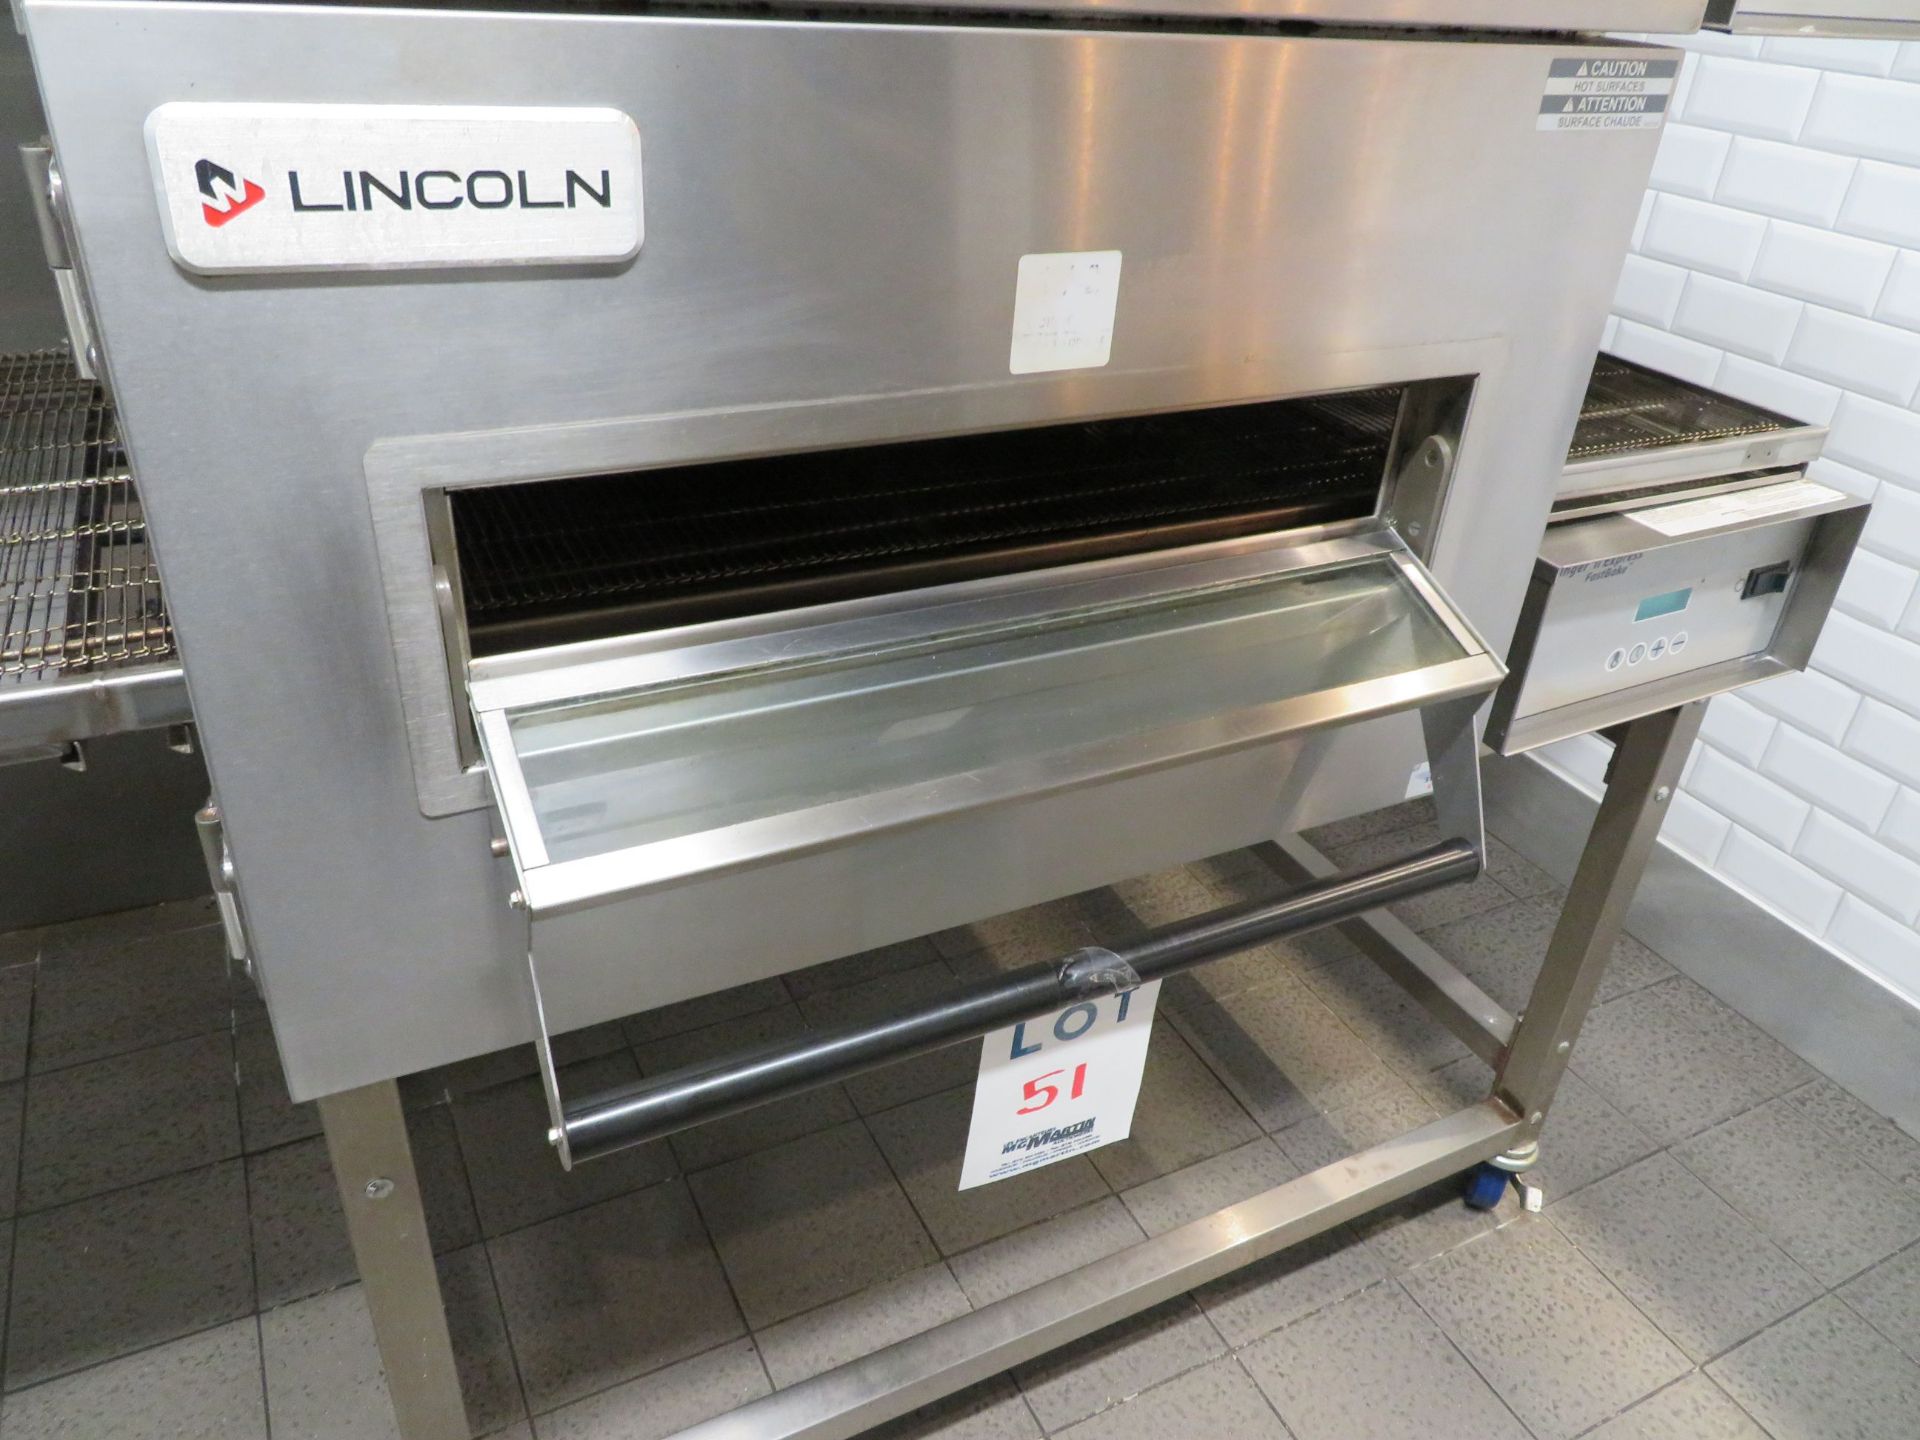 LINCOLN stainless steel pizza gas oven with conveyor (18"wide x 53" length), Mod: 1116-000- - Image 5 of 8